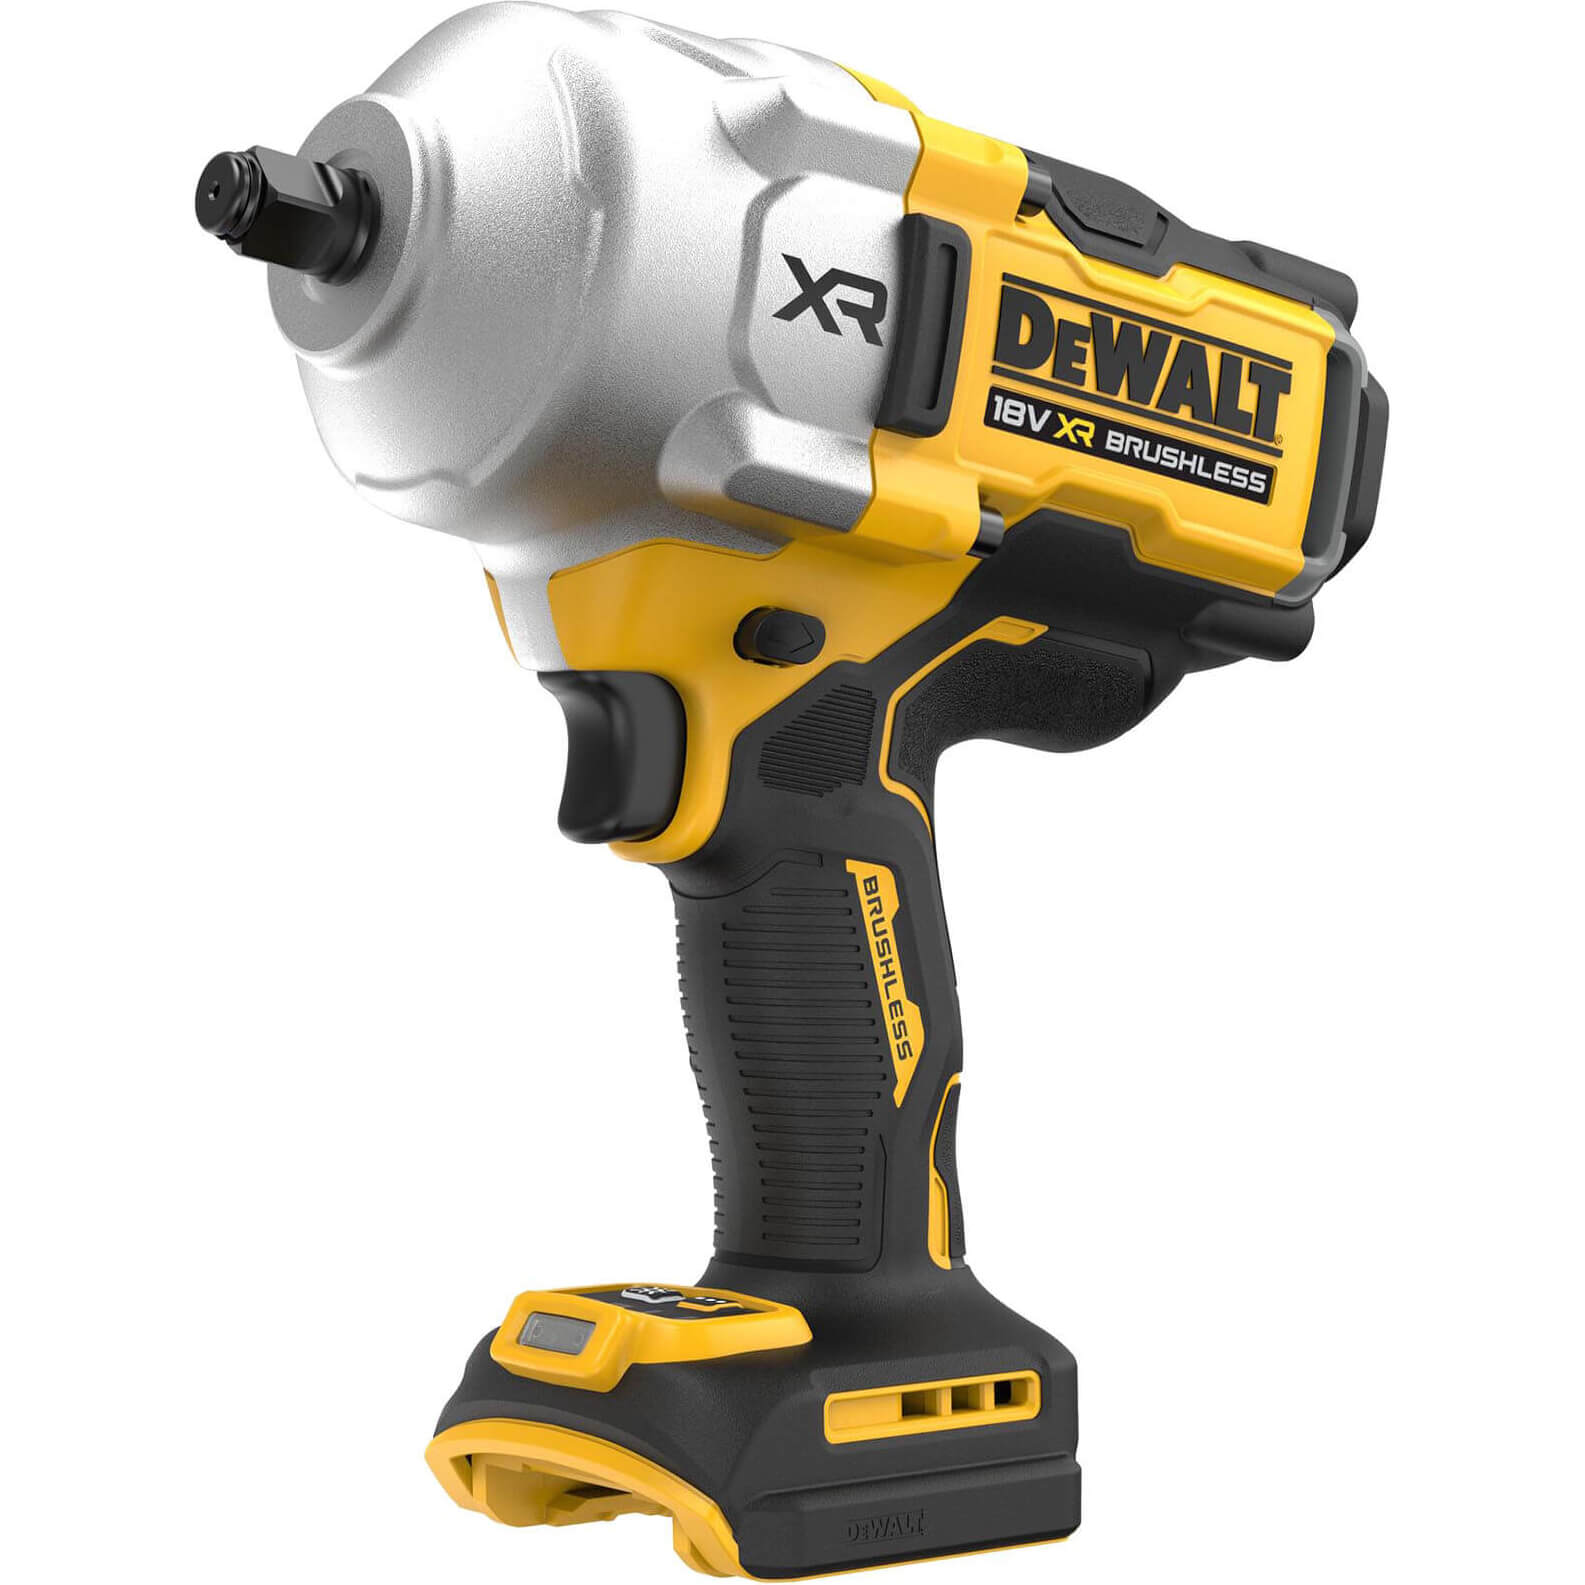 DeWalt DCF961 18v XR Cordless Brushless High Torque 1/2" Impact Wrench No Batteries No Charger No Case